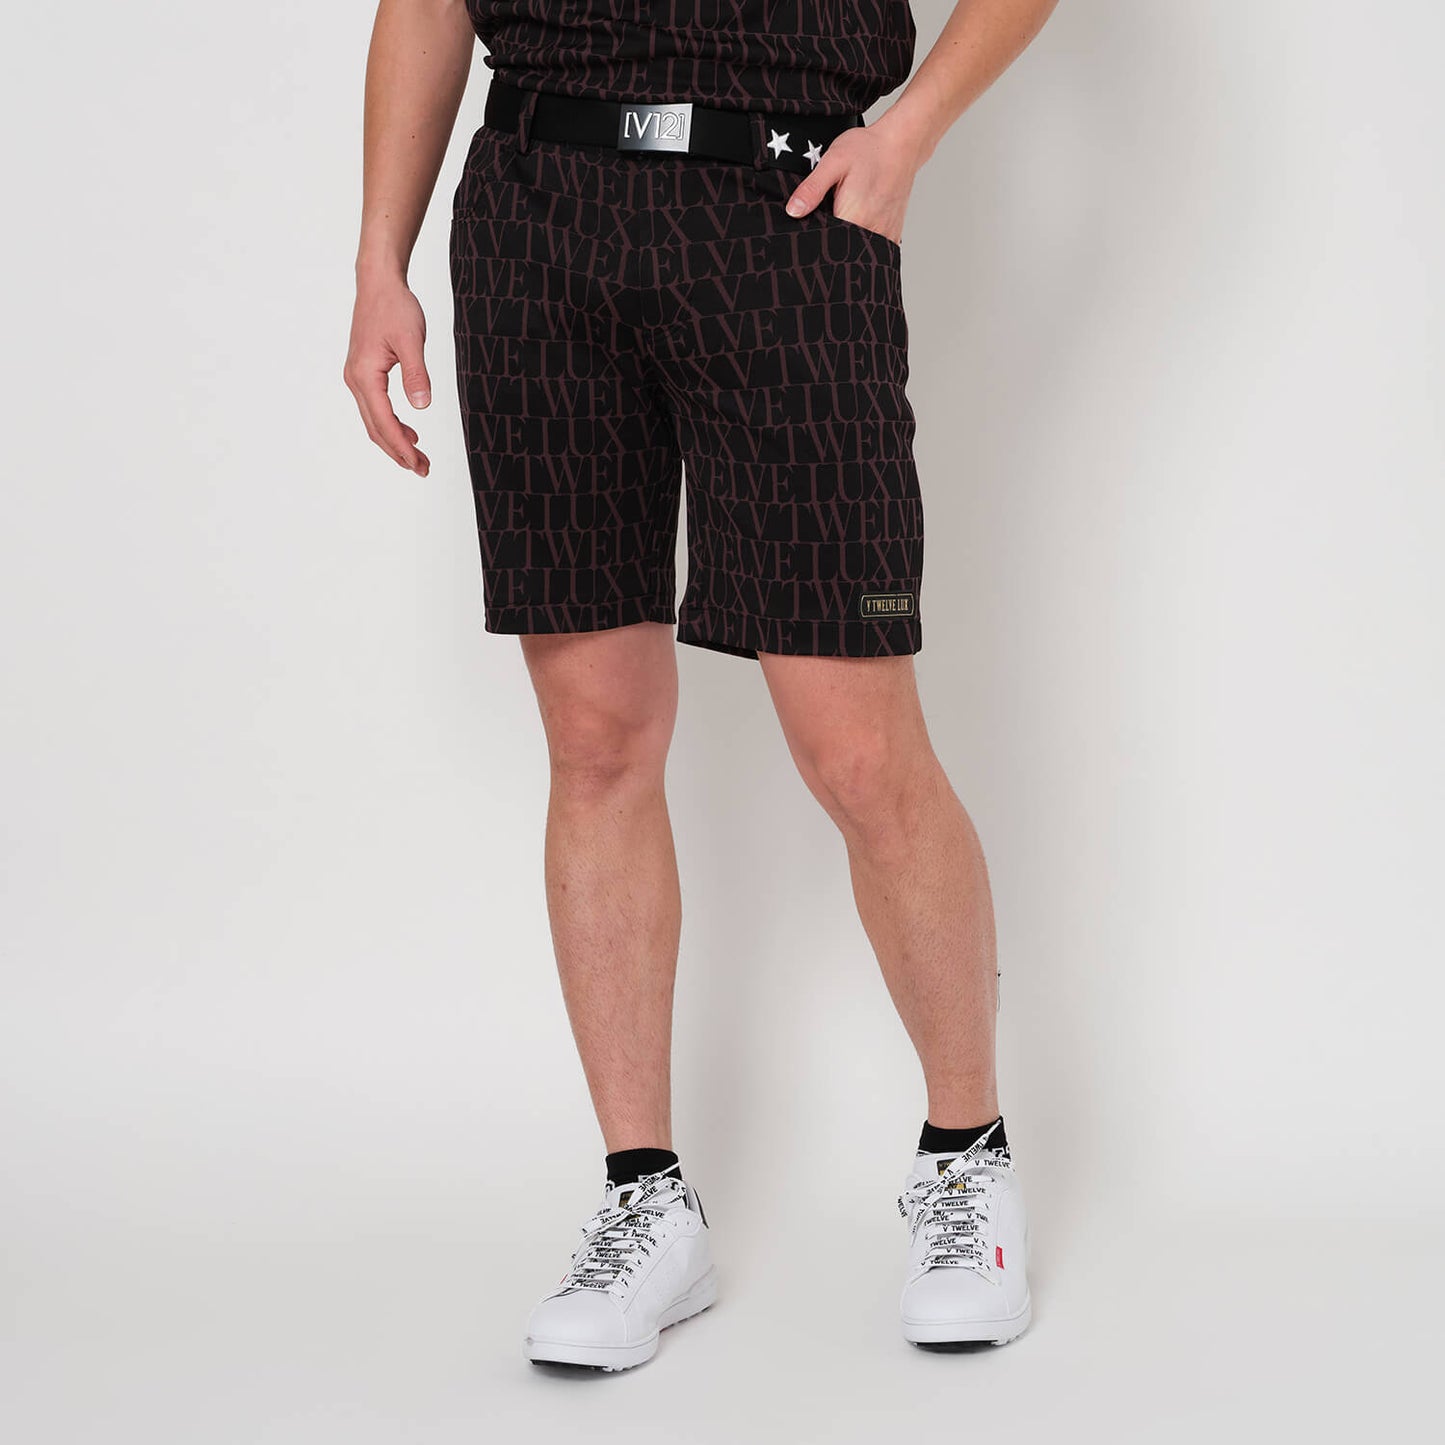 LX ALL LETTER SHORTS